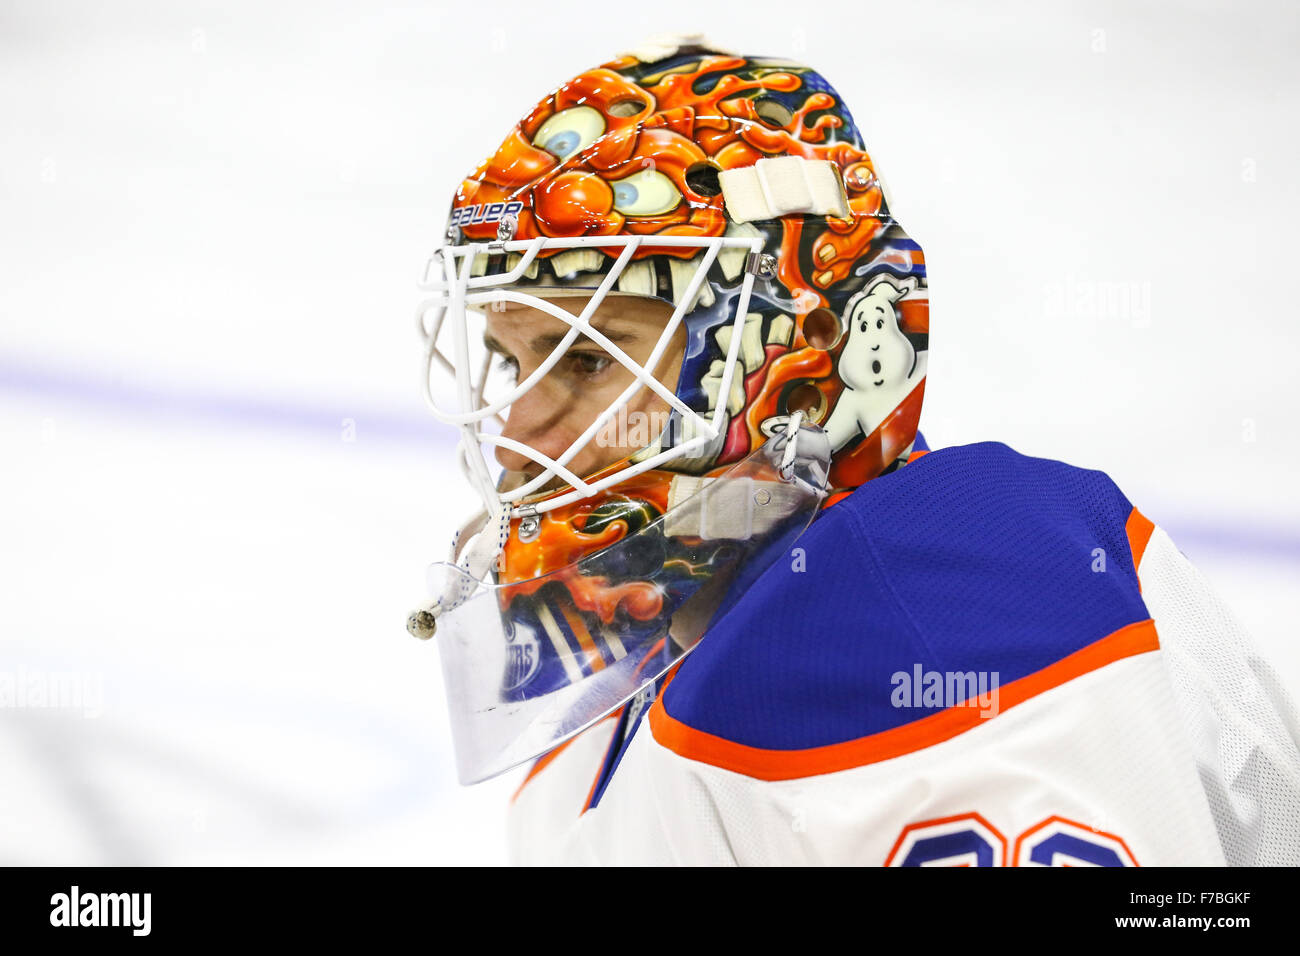 Raleigh, North Carolina, USA. 25th Nov, 2015. Edmonton Oilers goalie Cam Talbot (33) during the NHL game between the Edmonton Oilers and the Carolina Hurricanes at the PNC Arena. © Andy Martin Jr./ZUMA Wire/Alamy Live News Stock Photo